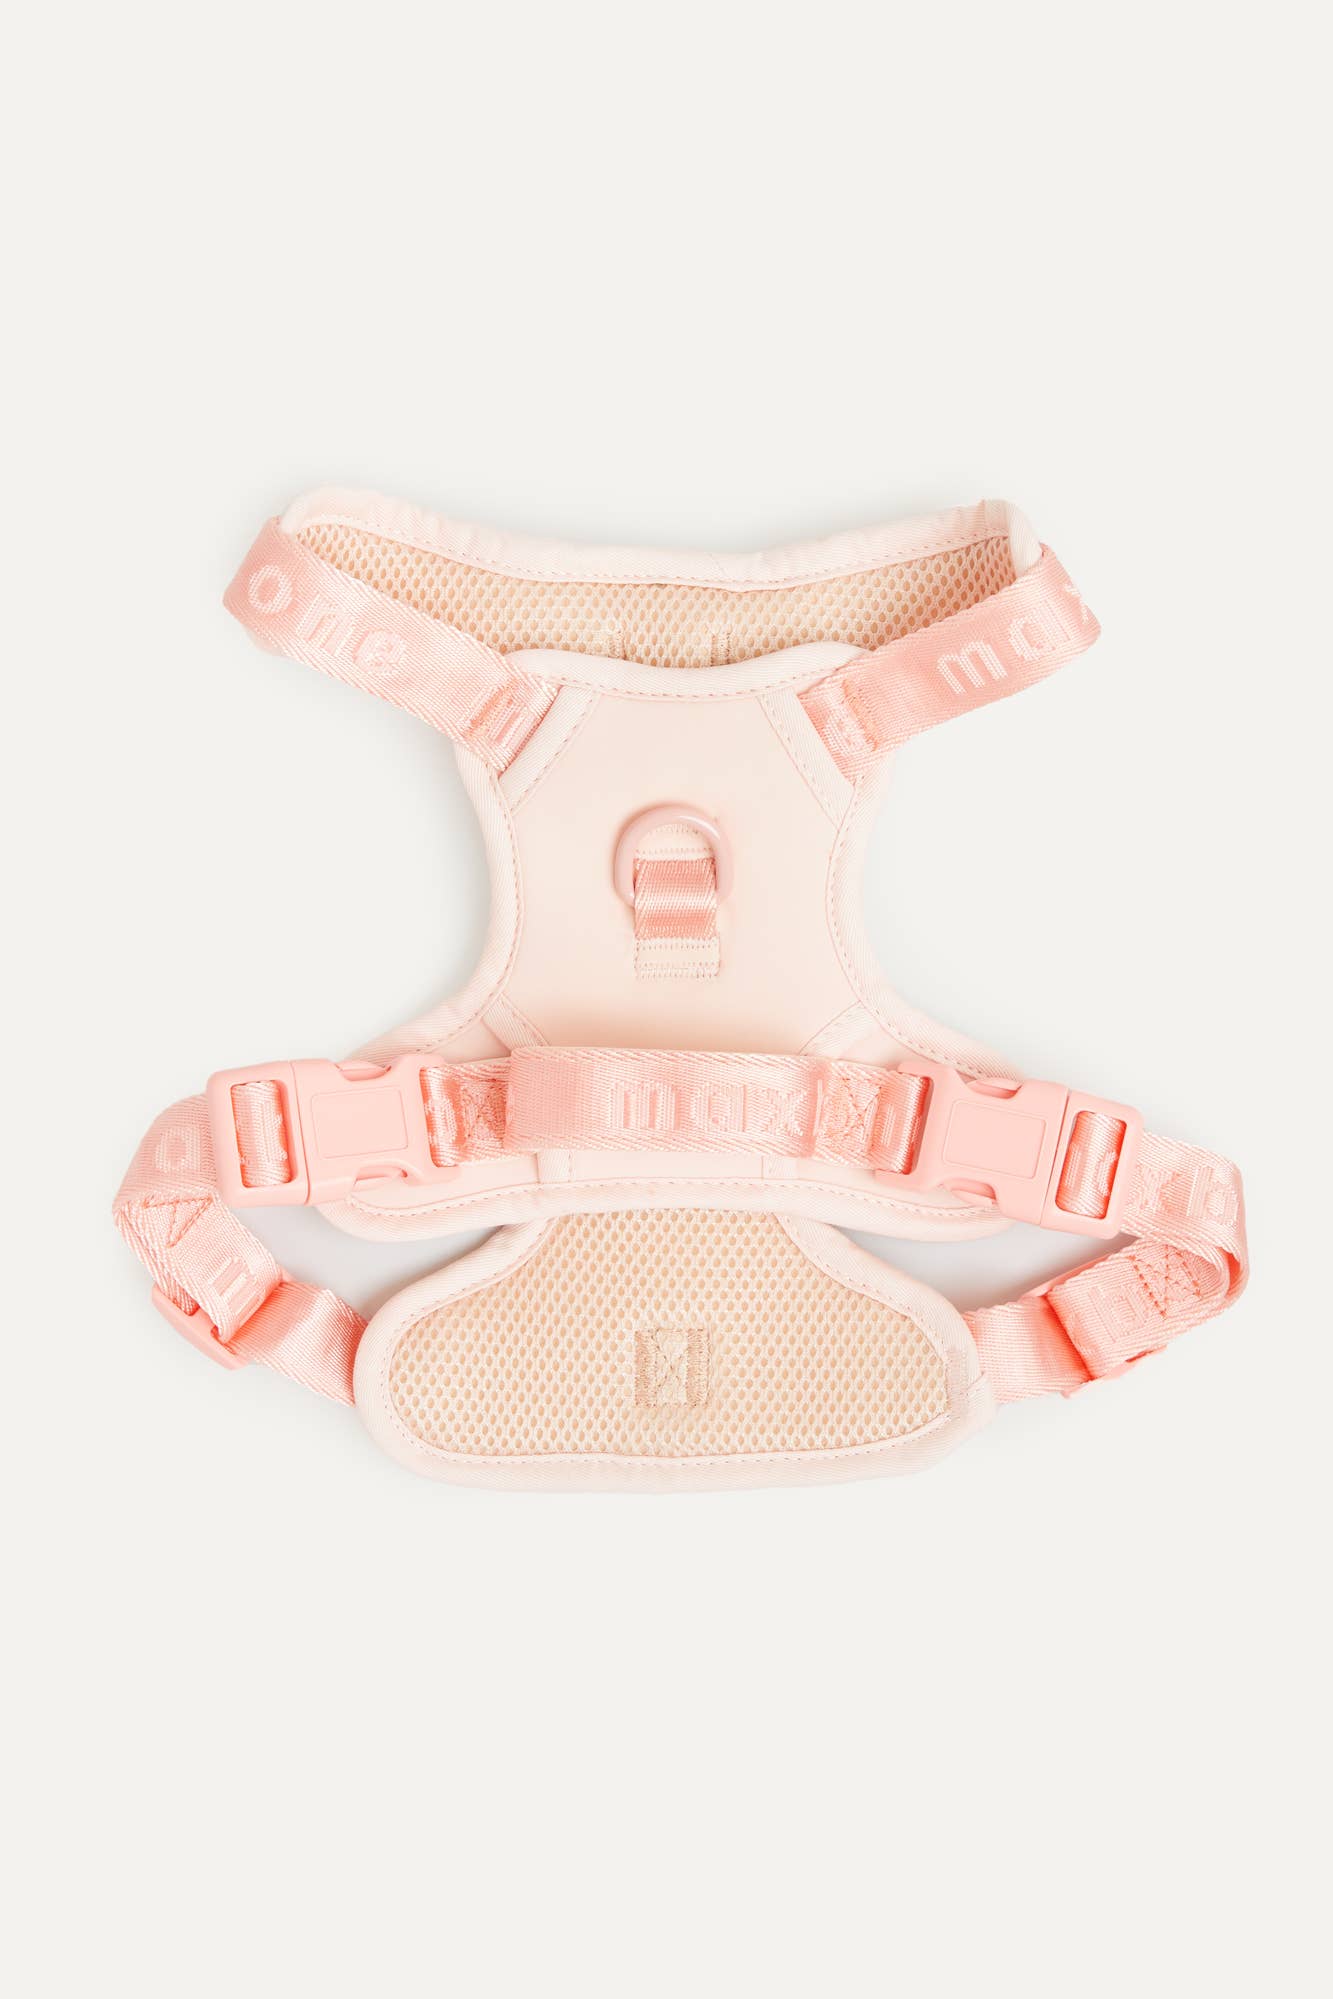 Easy Fit Dog Harness Peach